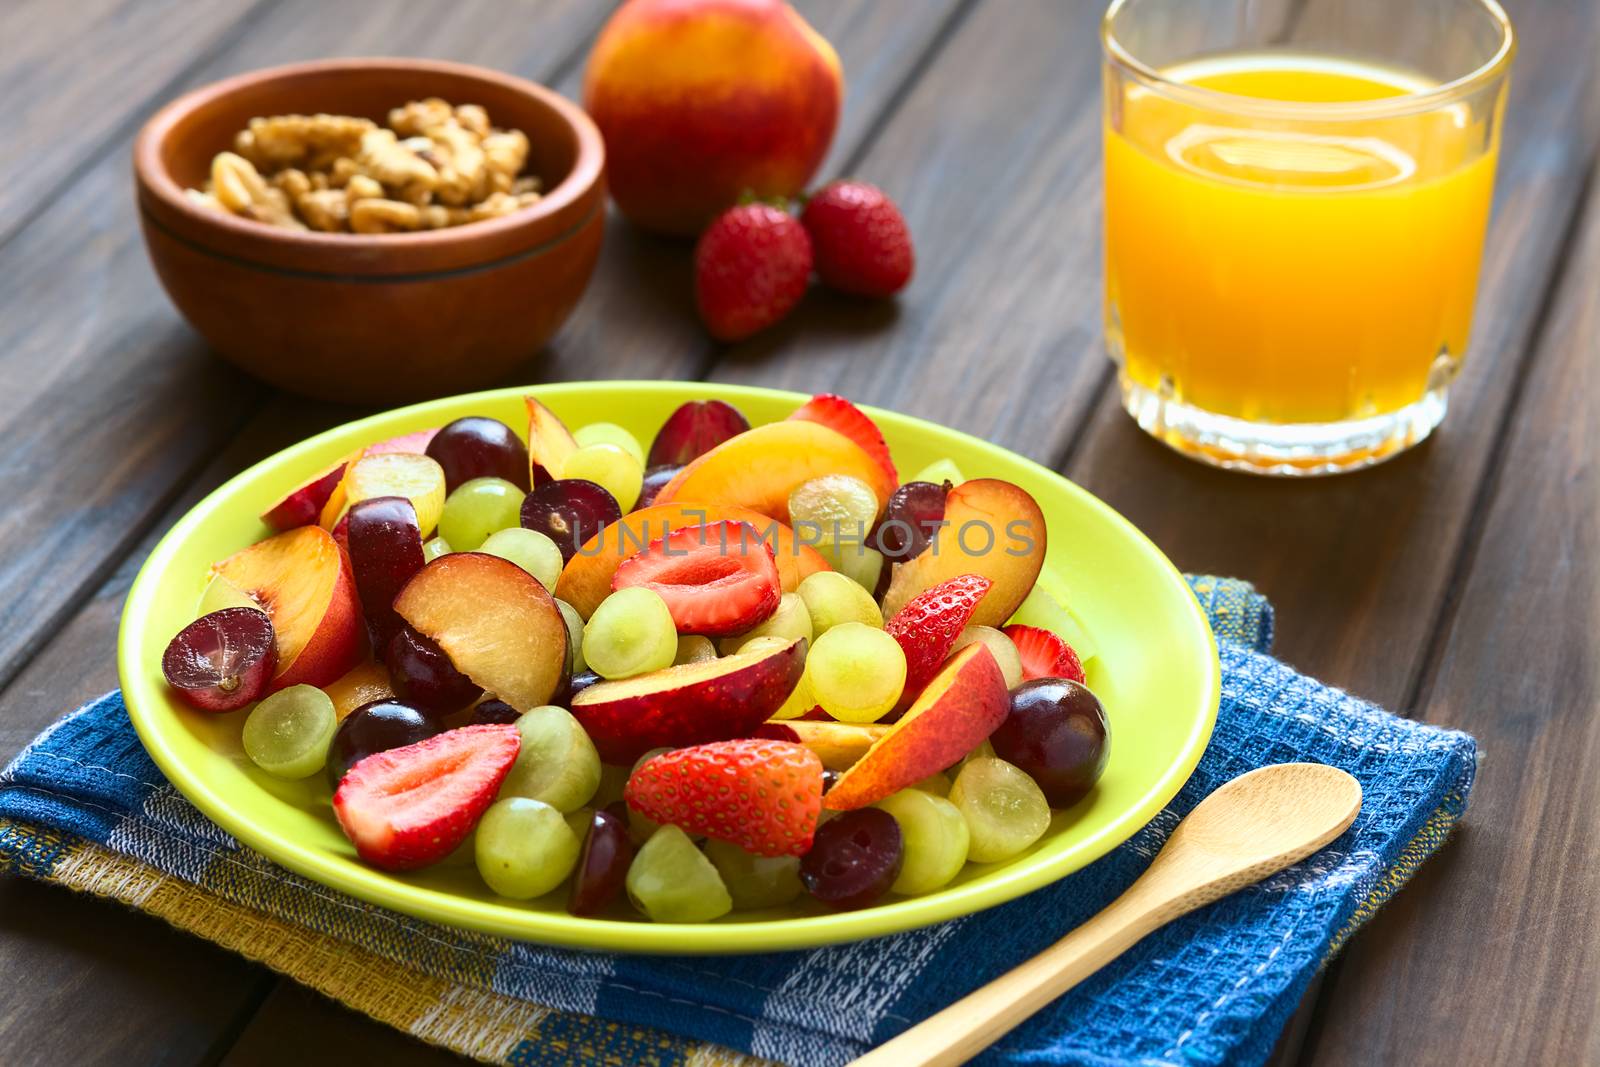 Fresh fruit salad made of grape, strawberry, plum and nectarine served on plate with walnut, nectarine, strawberry, juice in the back, photographed on dark wood with natural light (Selective Focus, Focus in the middle of the salad)